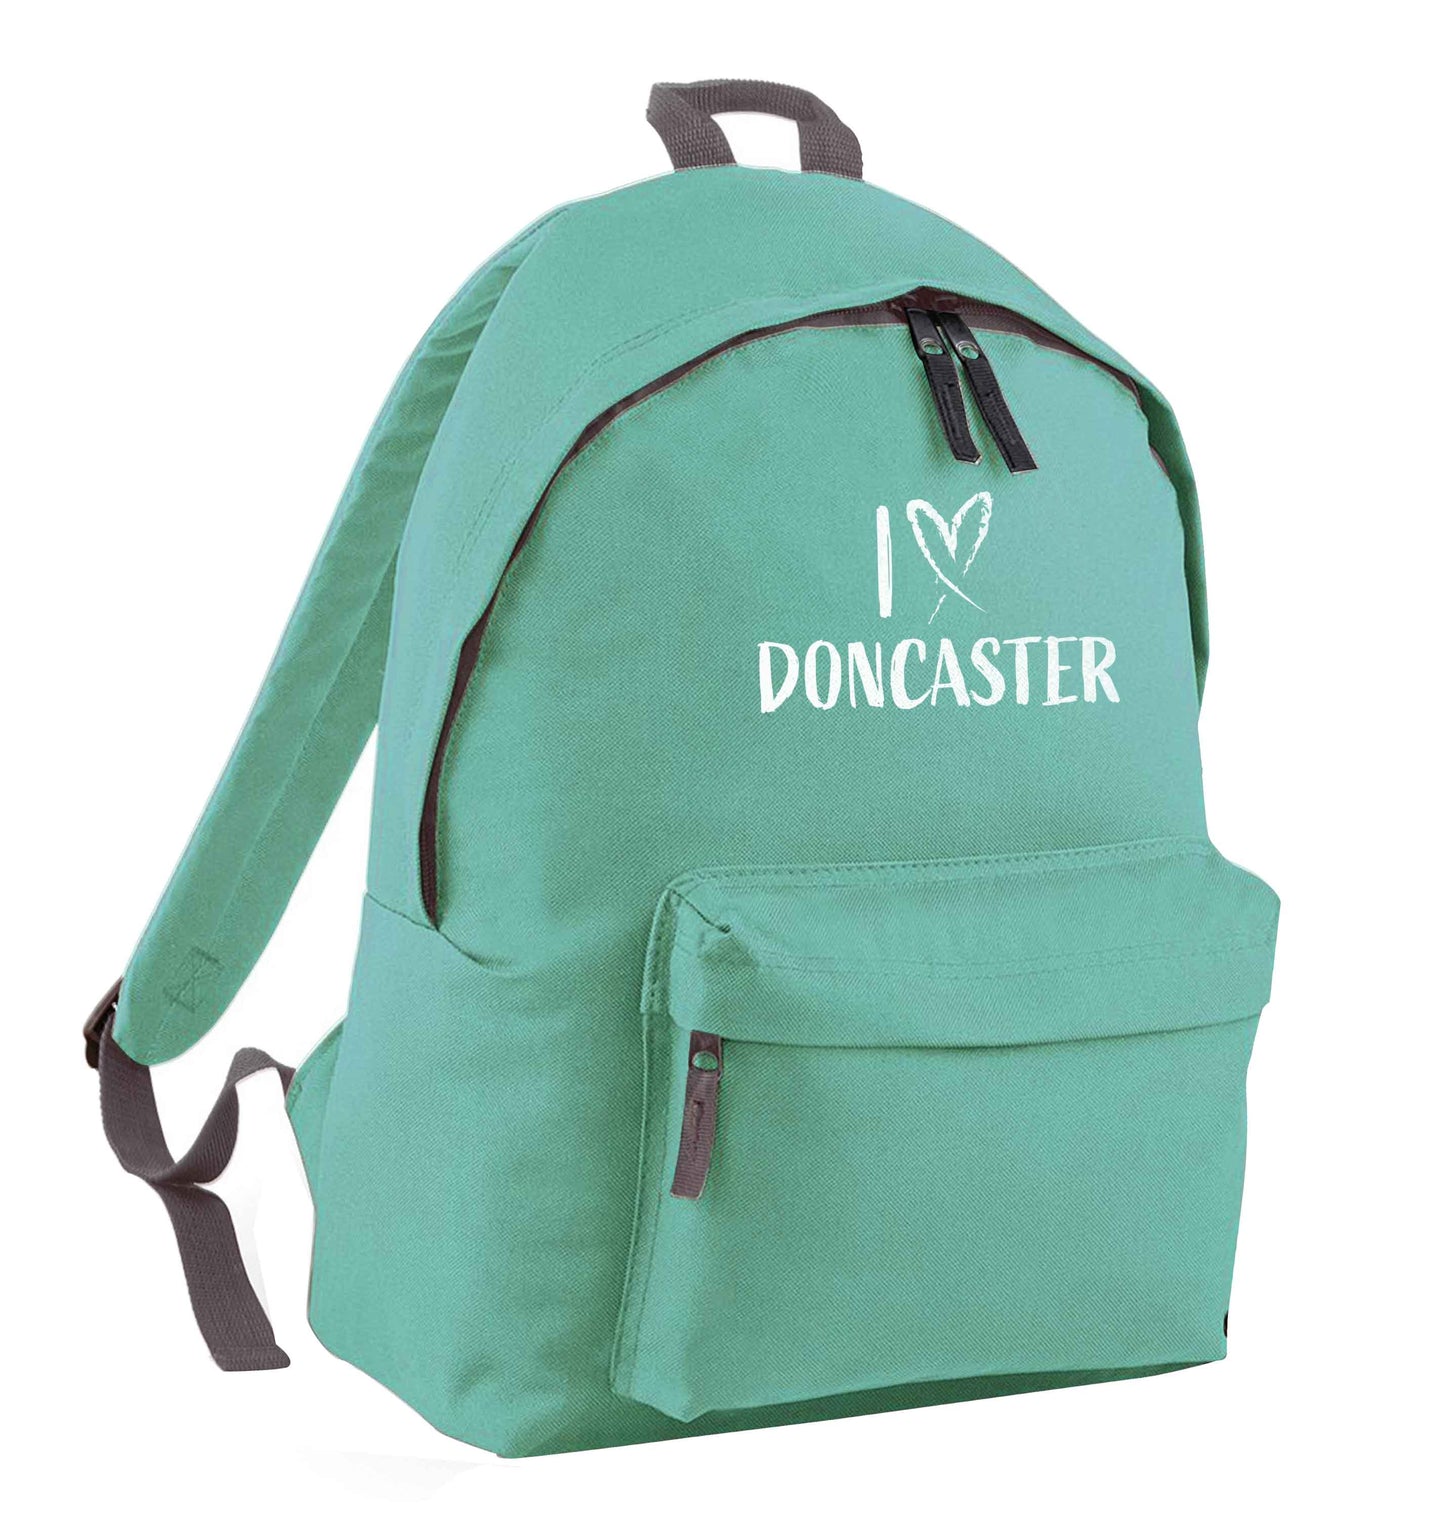 I love Doncaster mint adults backpack